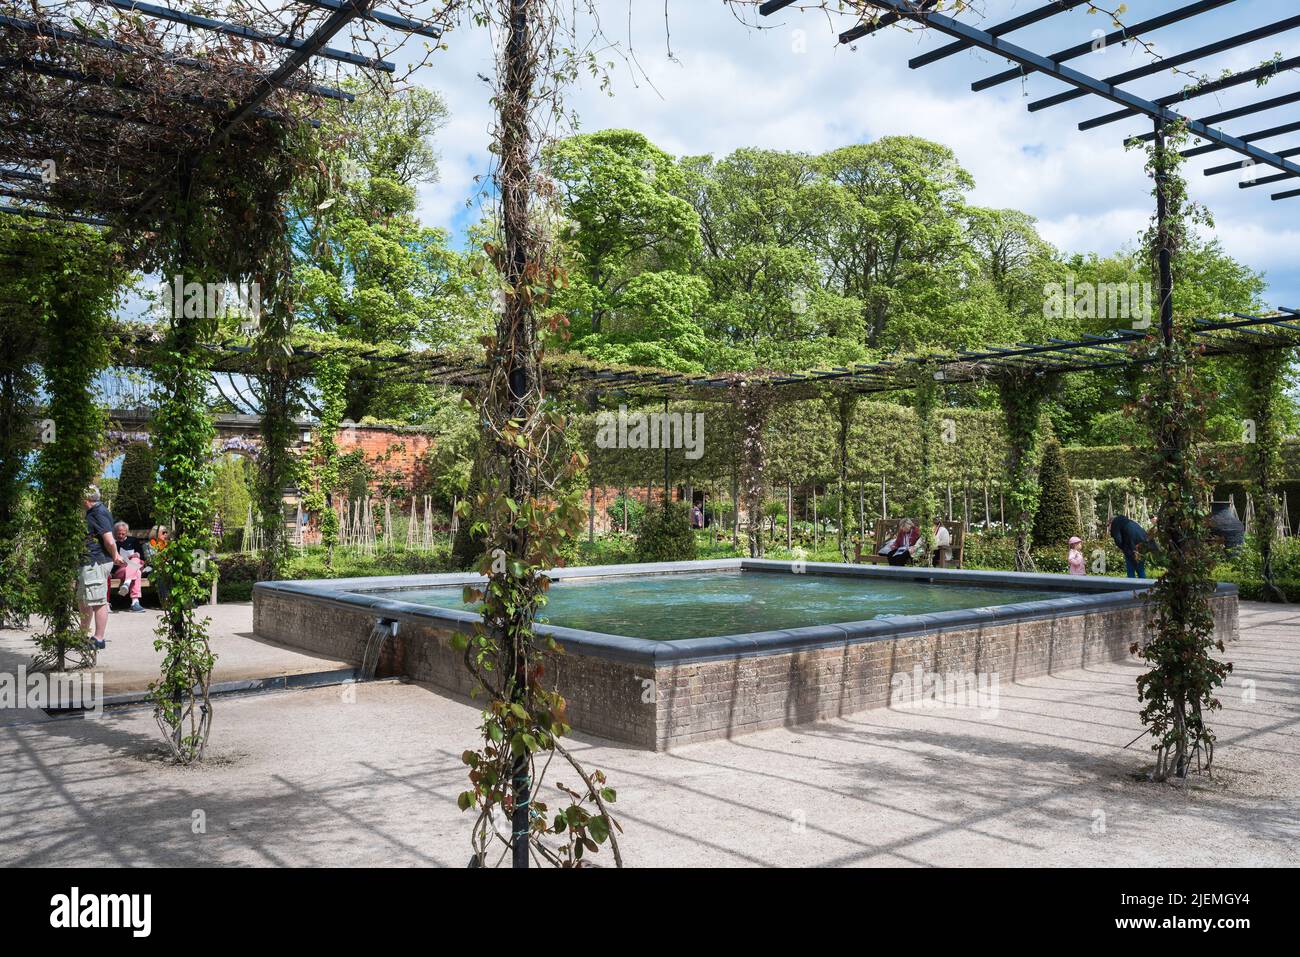 Alnwick Garden Northumberland, view in spring of the parterre garden and its centrepiece - a vine enclosed pool - in Alnwick Garden, Nothumberland UK Stock Photo